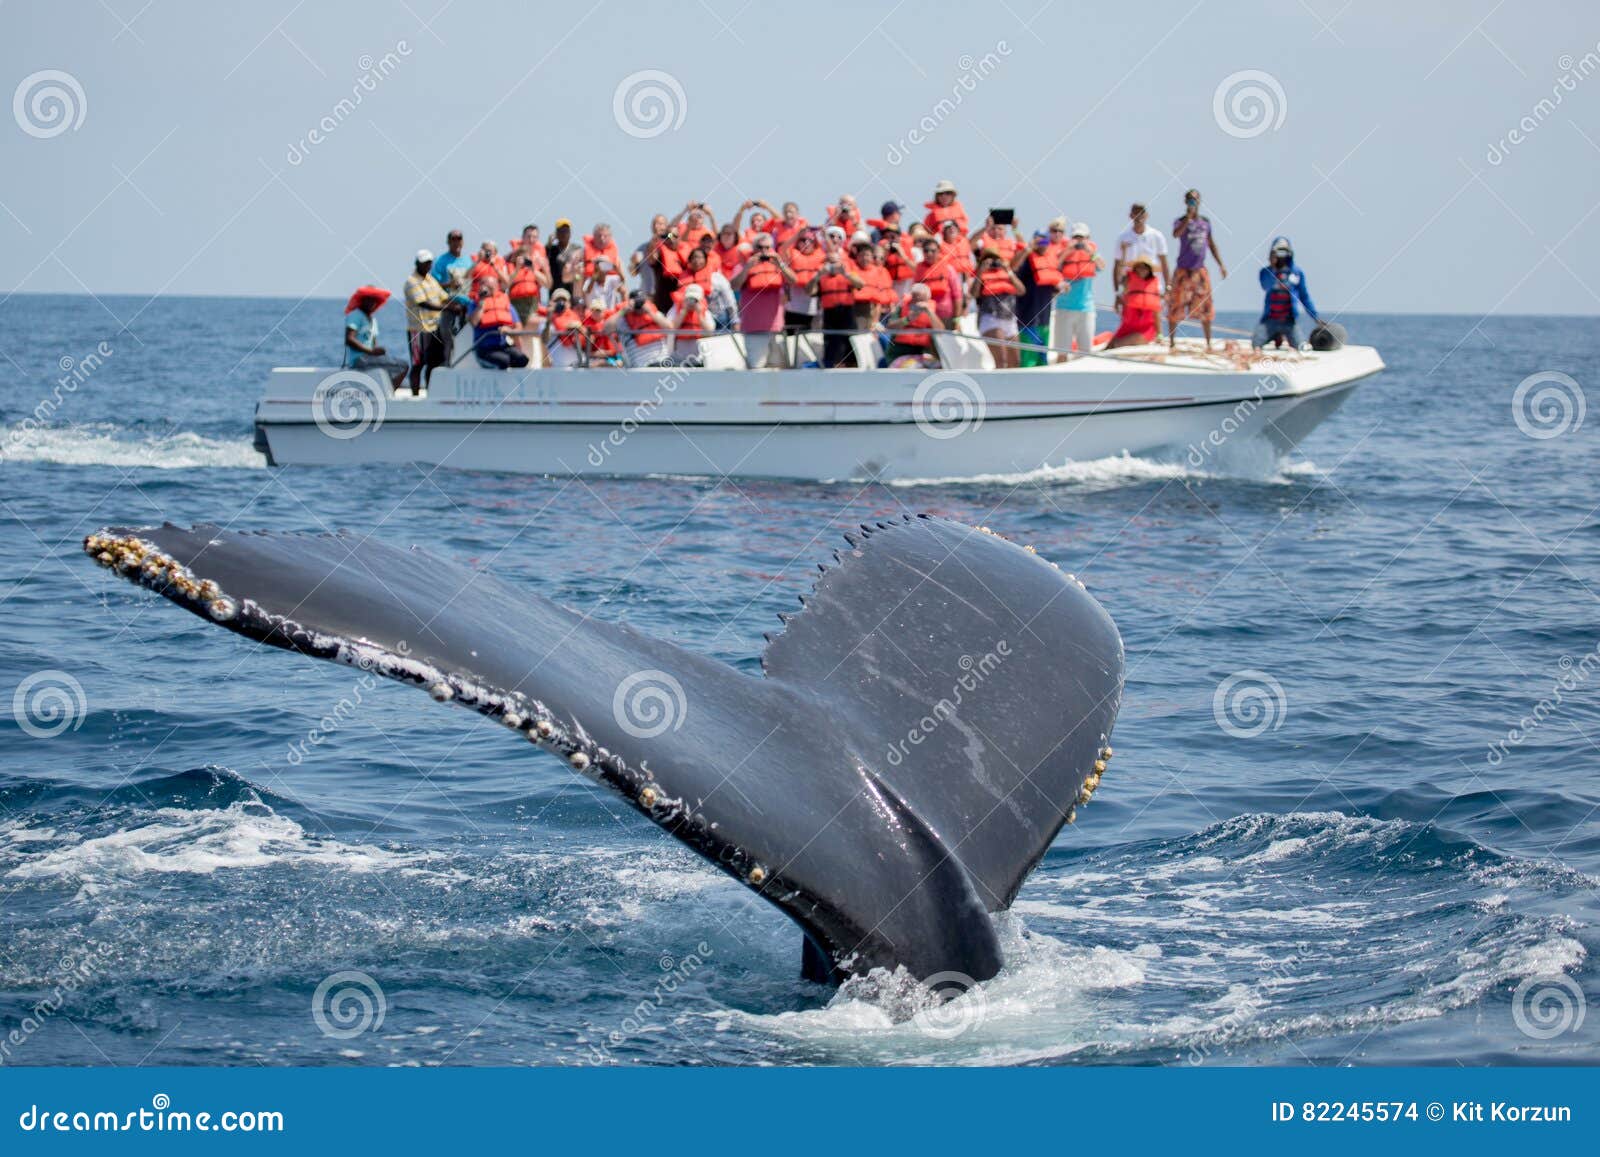 humpback whale tail in samana, dominican republic and torist whale watching boat